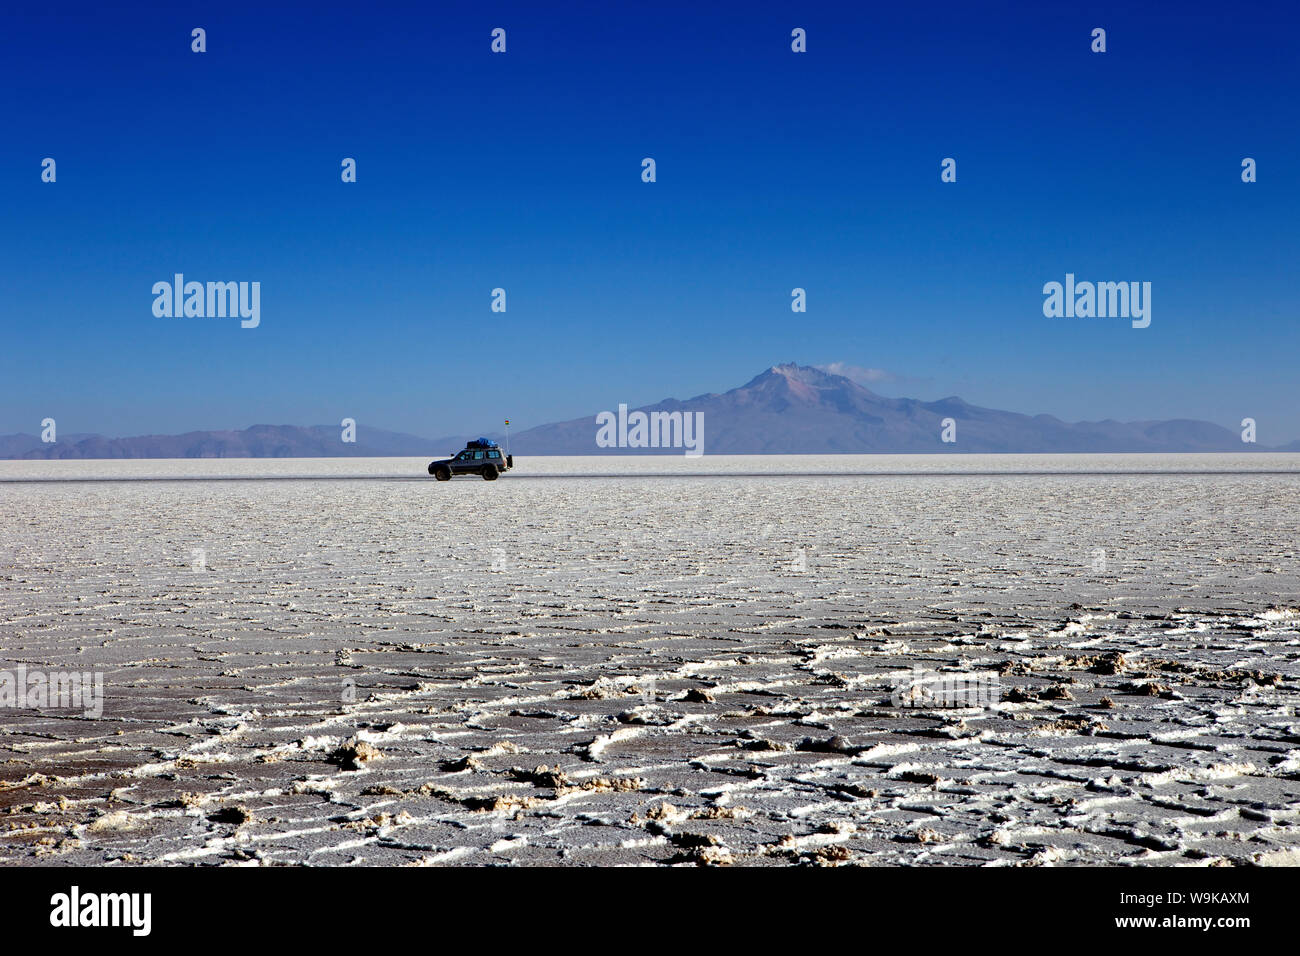 A 4x4 on Salar de Uyuni, the largest salt flat in the world, South West Bolivia, Bolivia, South America Stock Photo